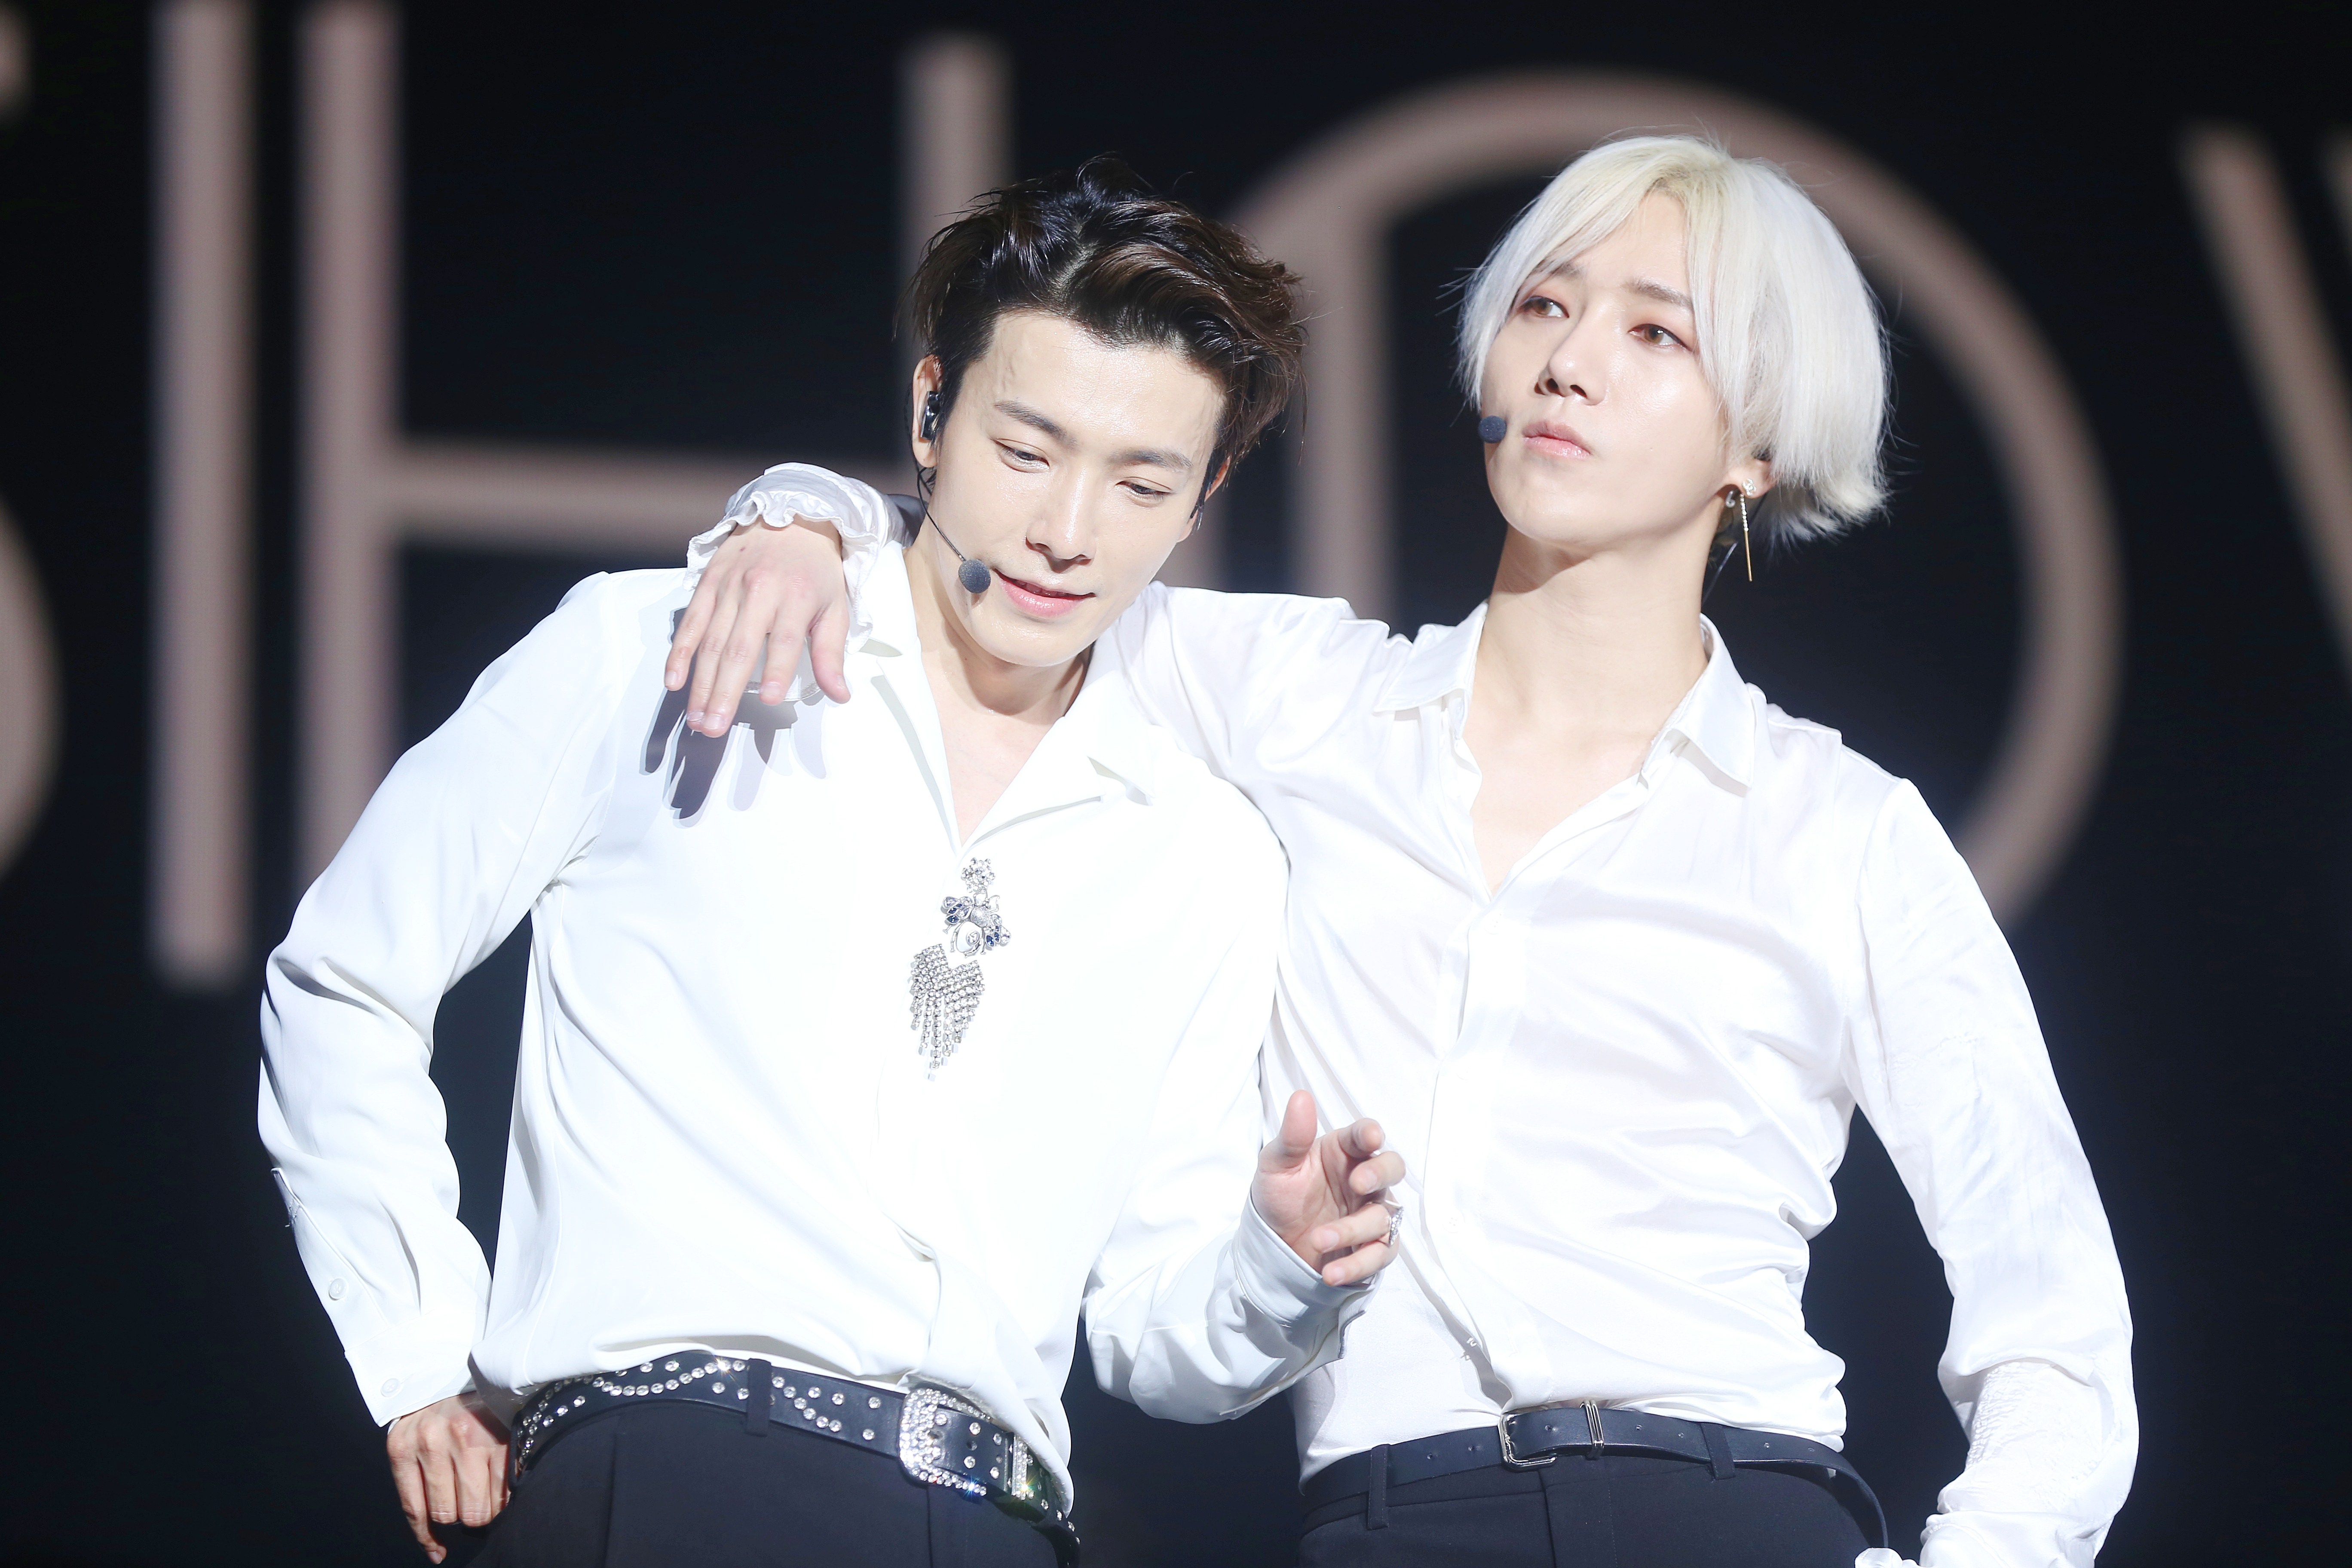 DONGHAE & YESUNG